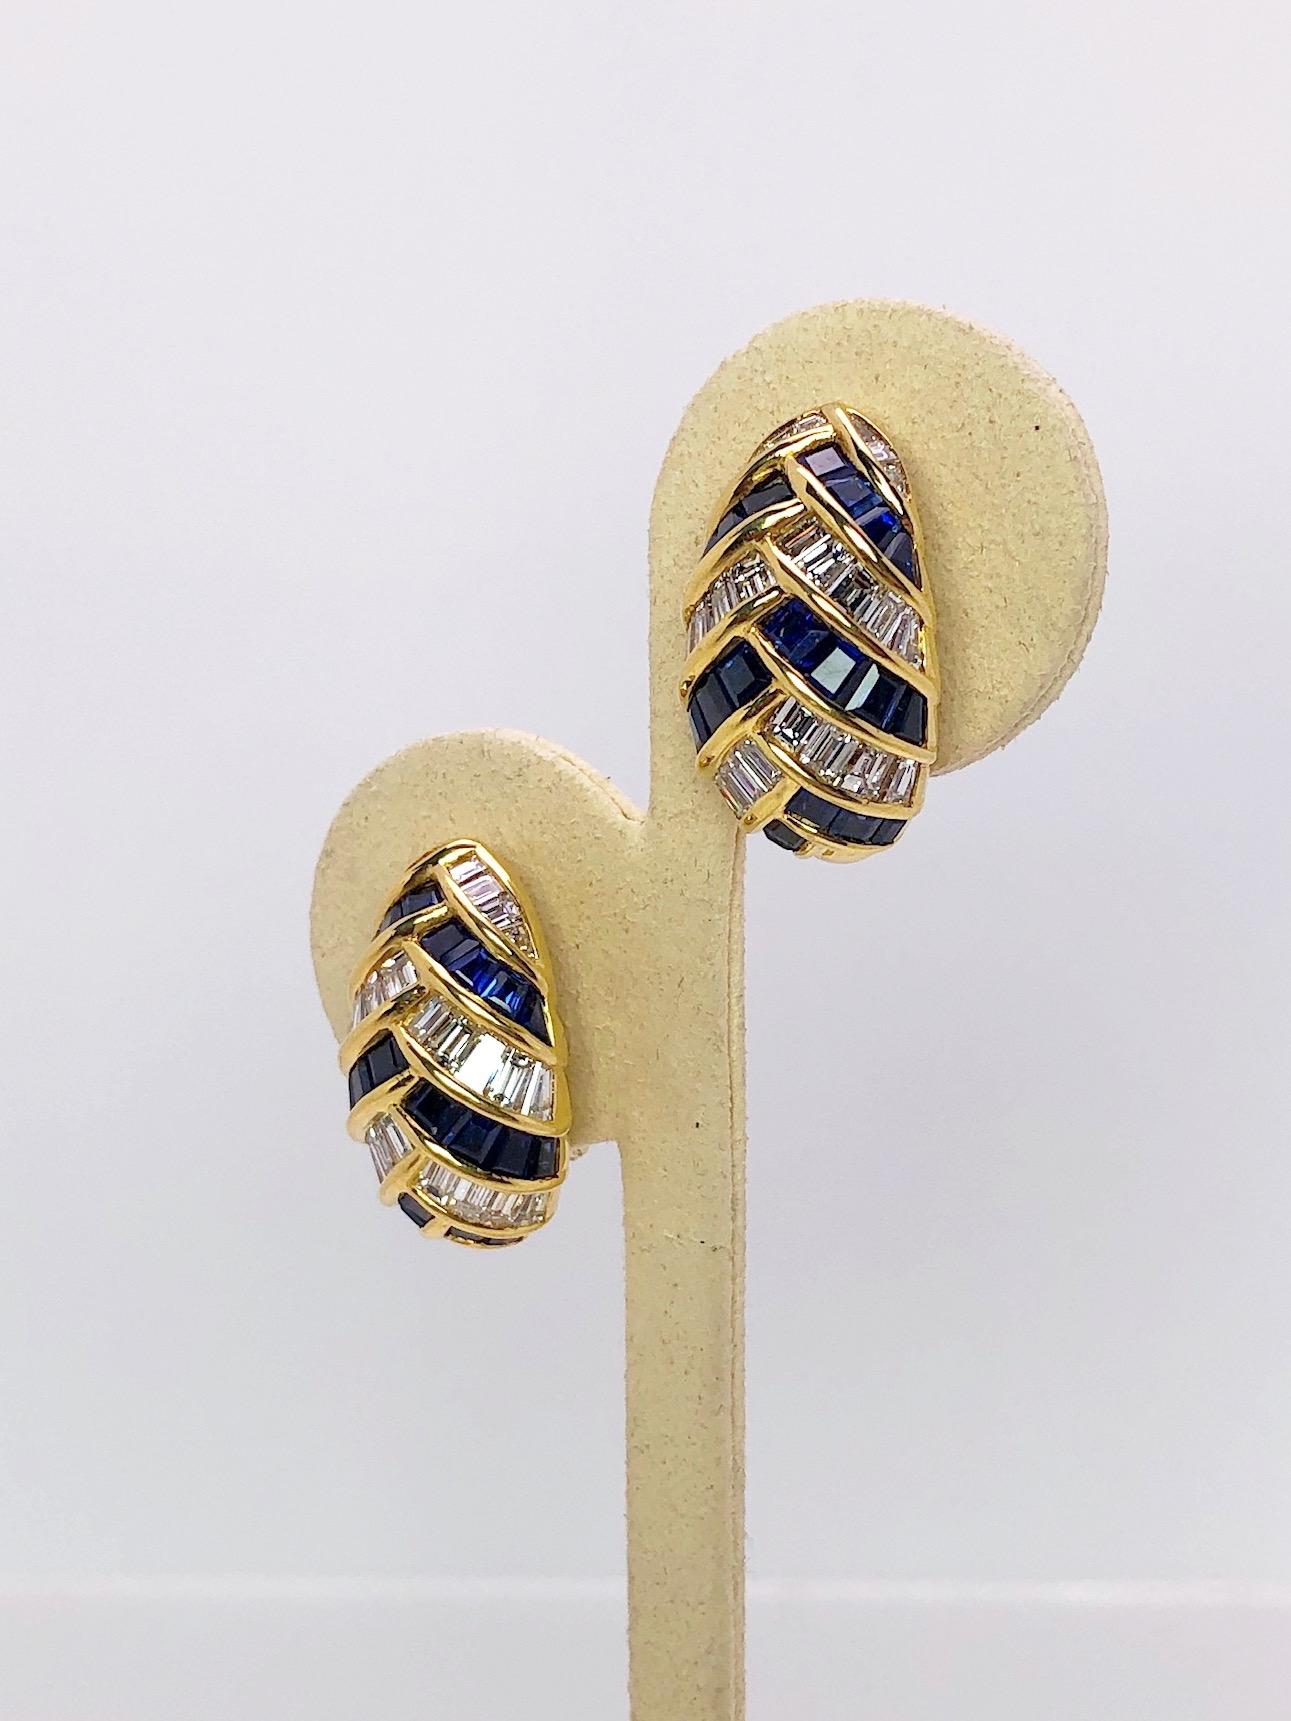 A classic oval shaped 18 karat yellow gold earring is impeccably set with Baguette Cut Diamonds and Blue Sapphires. The stones are set in an alternating weaved pattern with gold bezels. The earrings measure 1